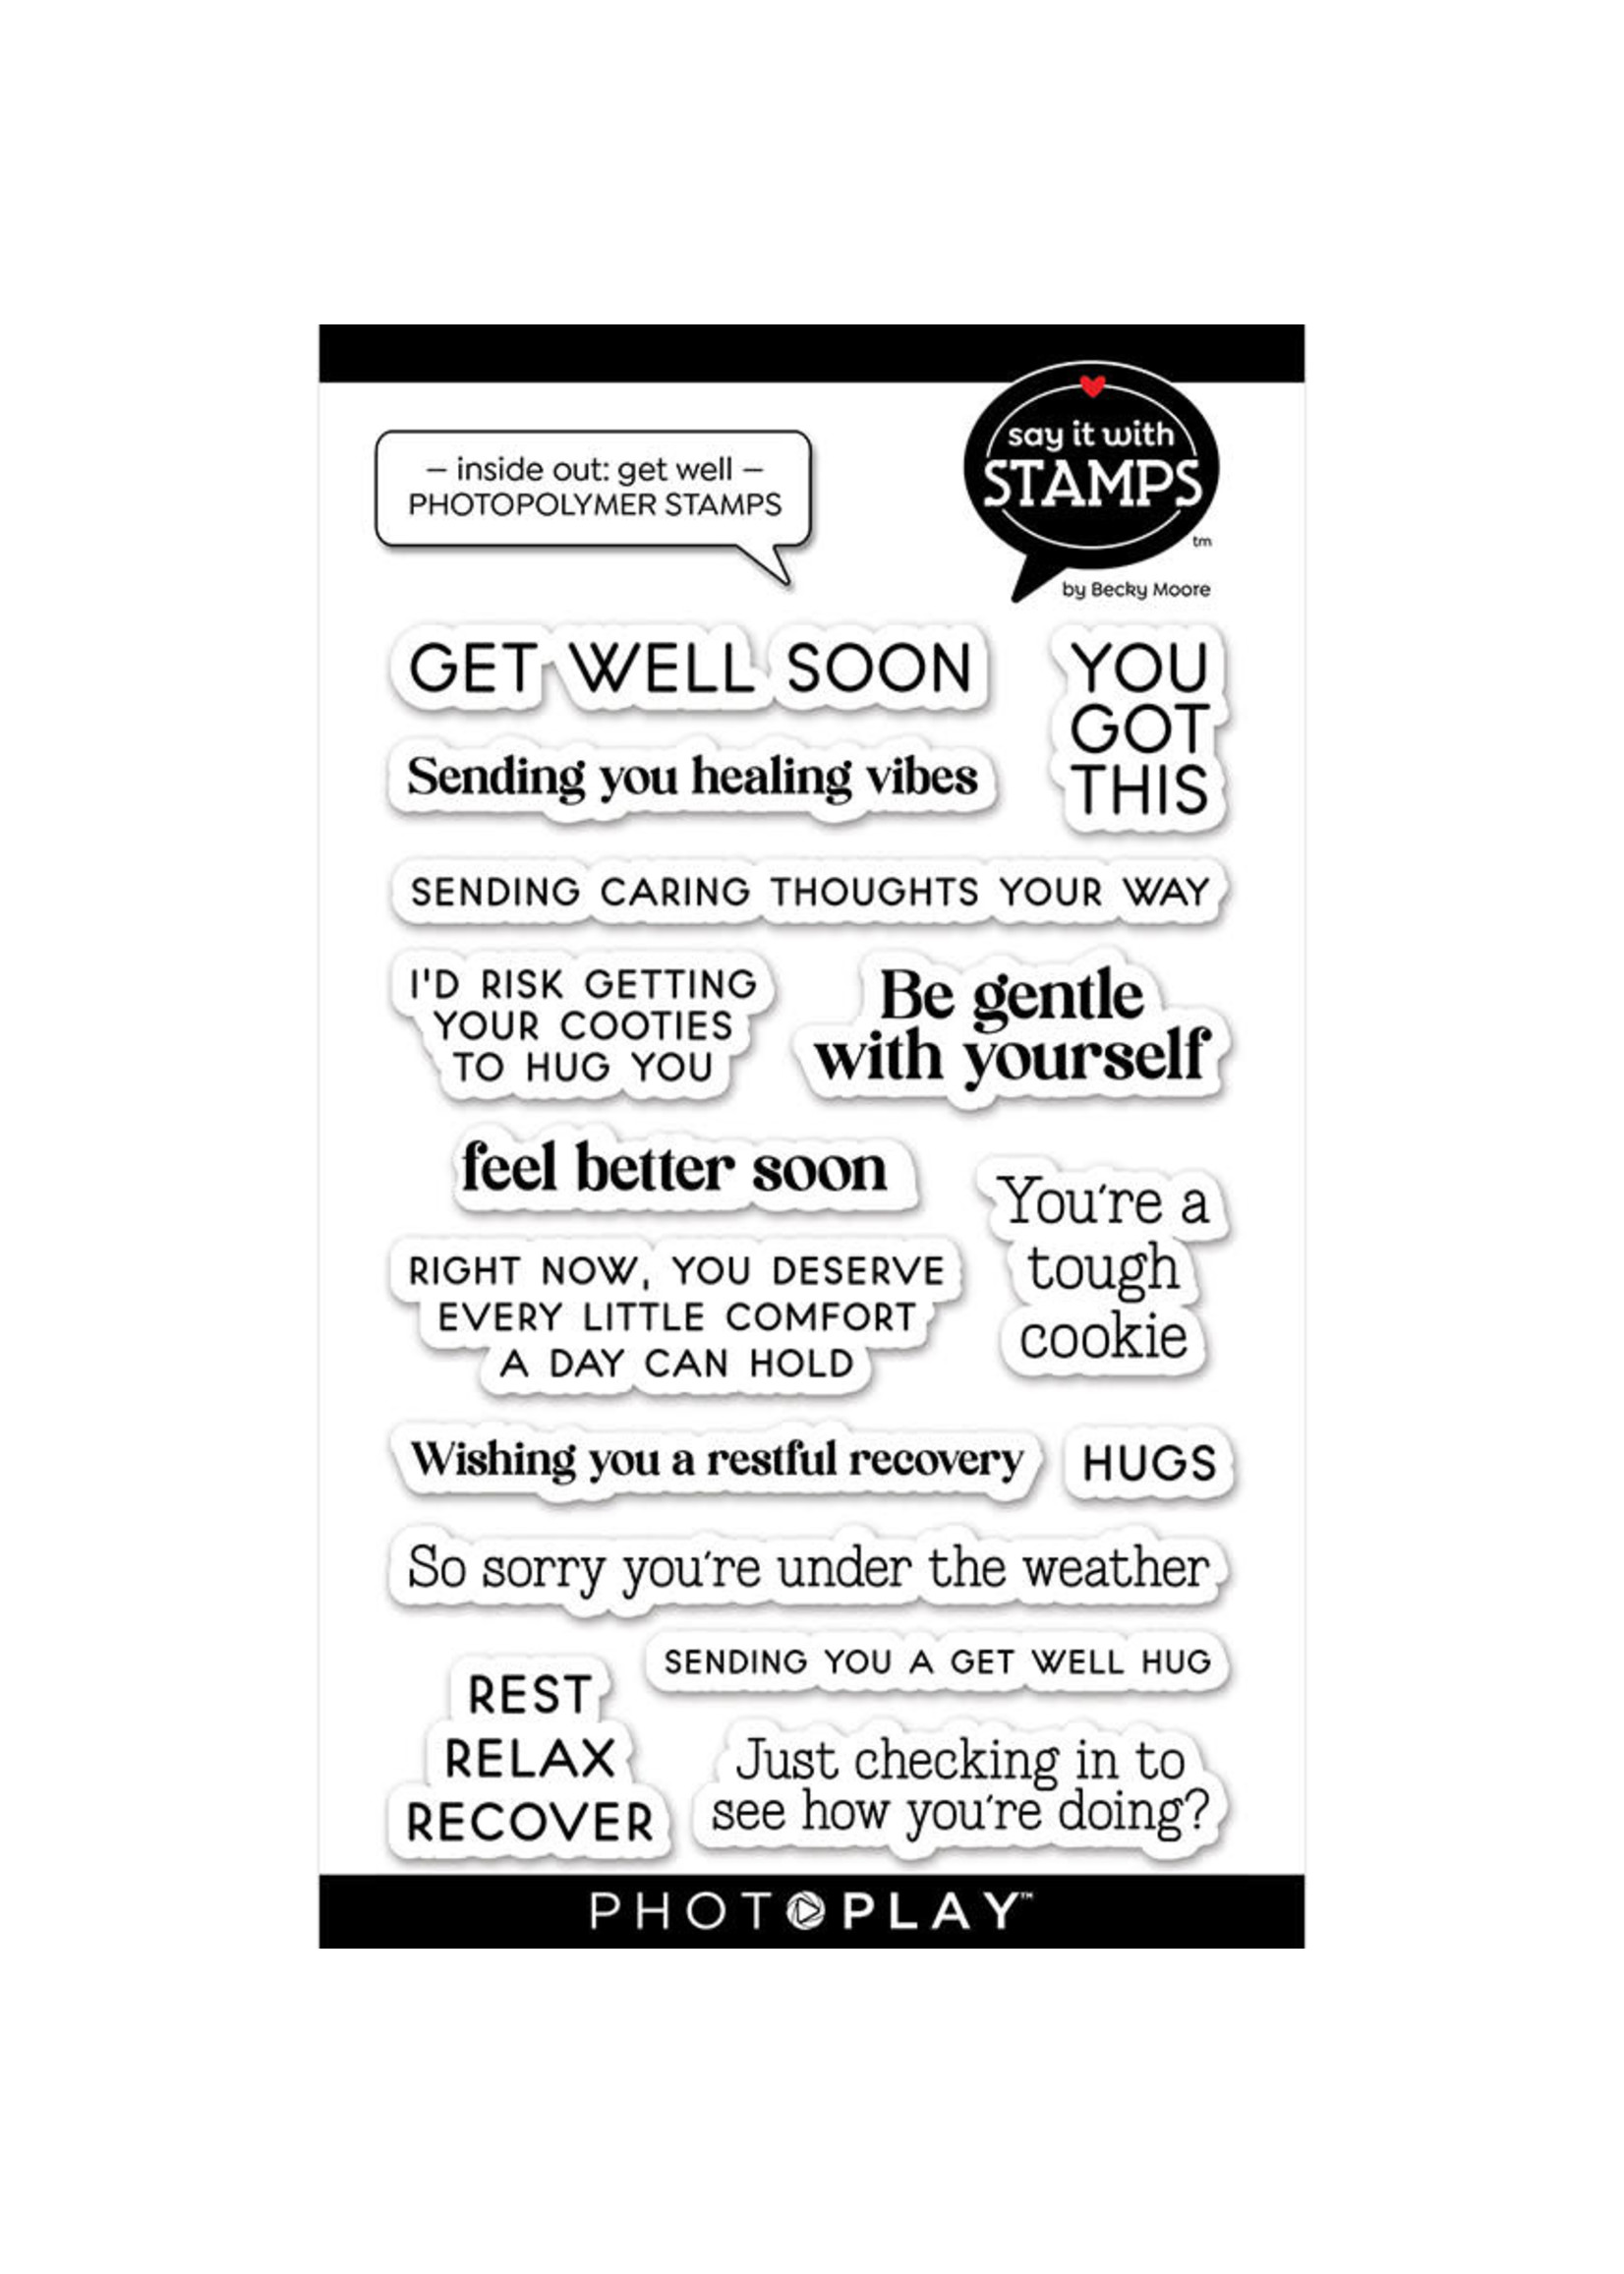 Photoplay Inside Out: Get Well Soon 4x6 Stamp